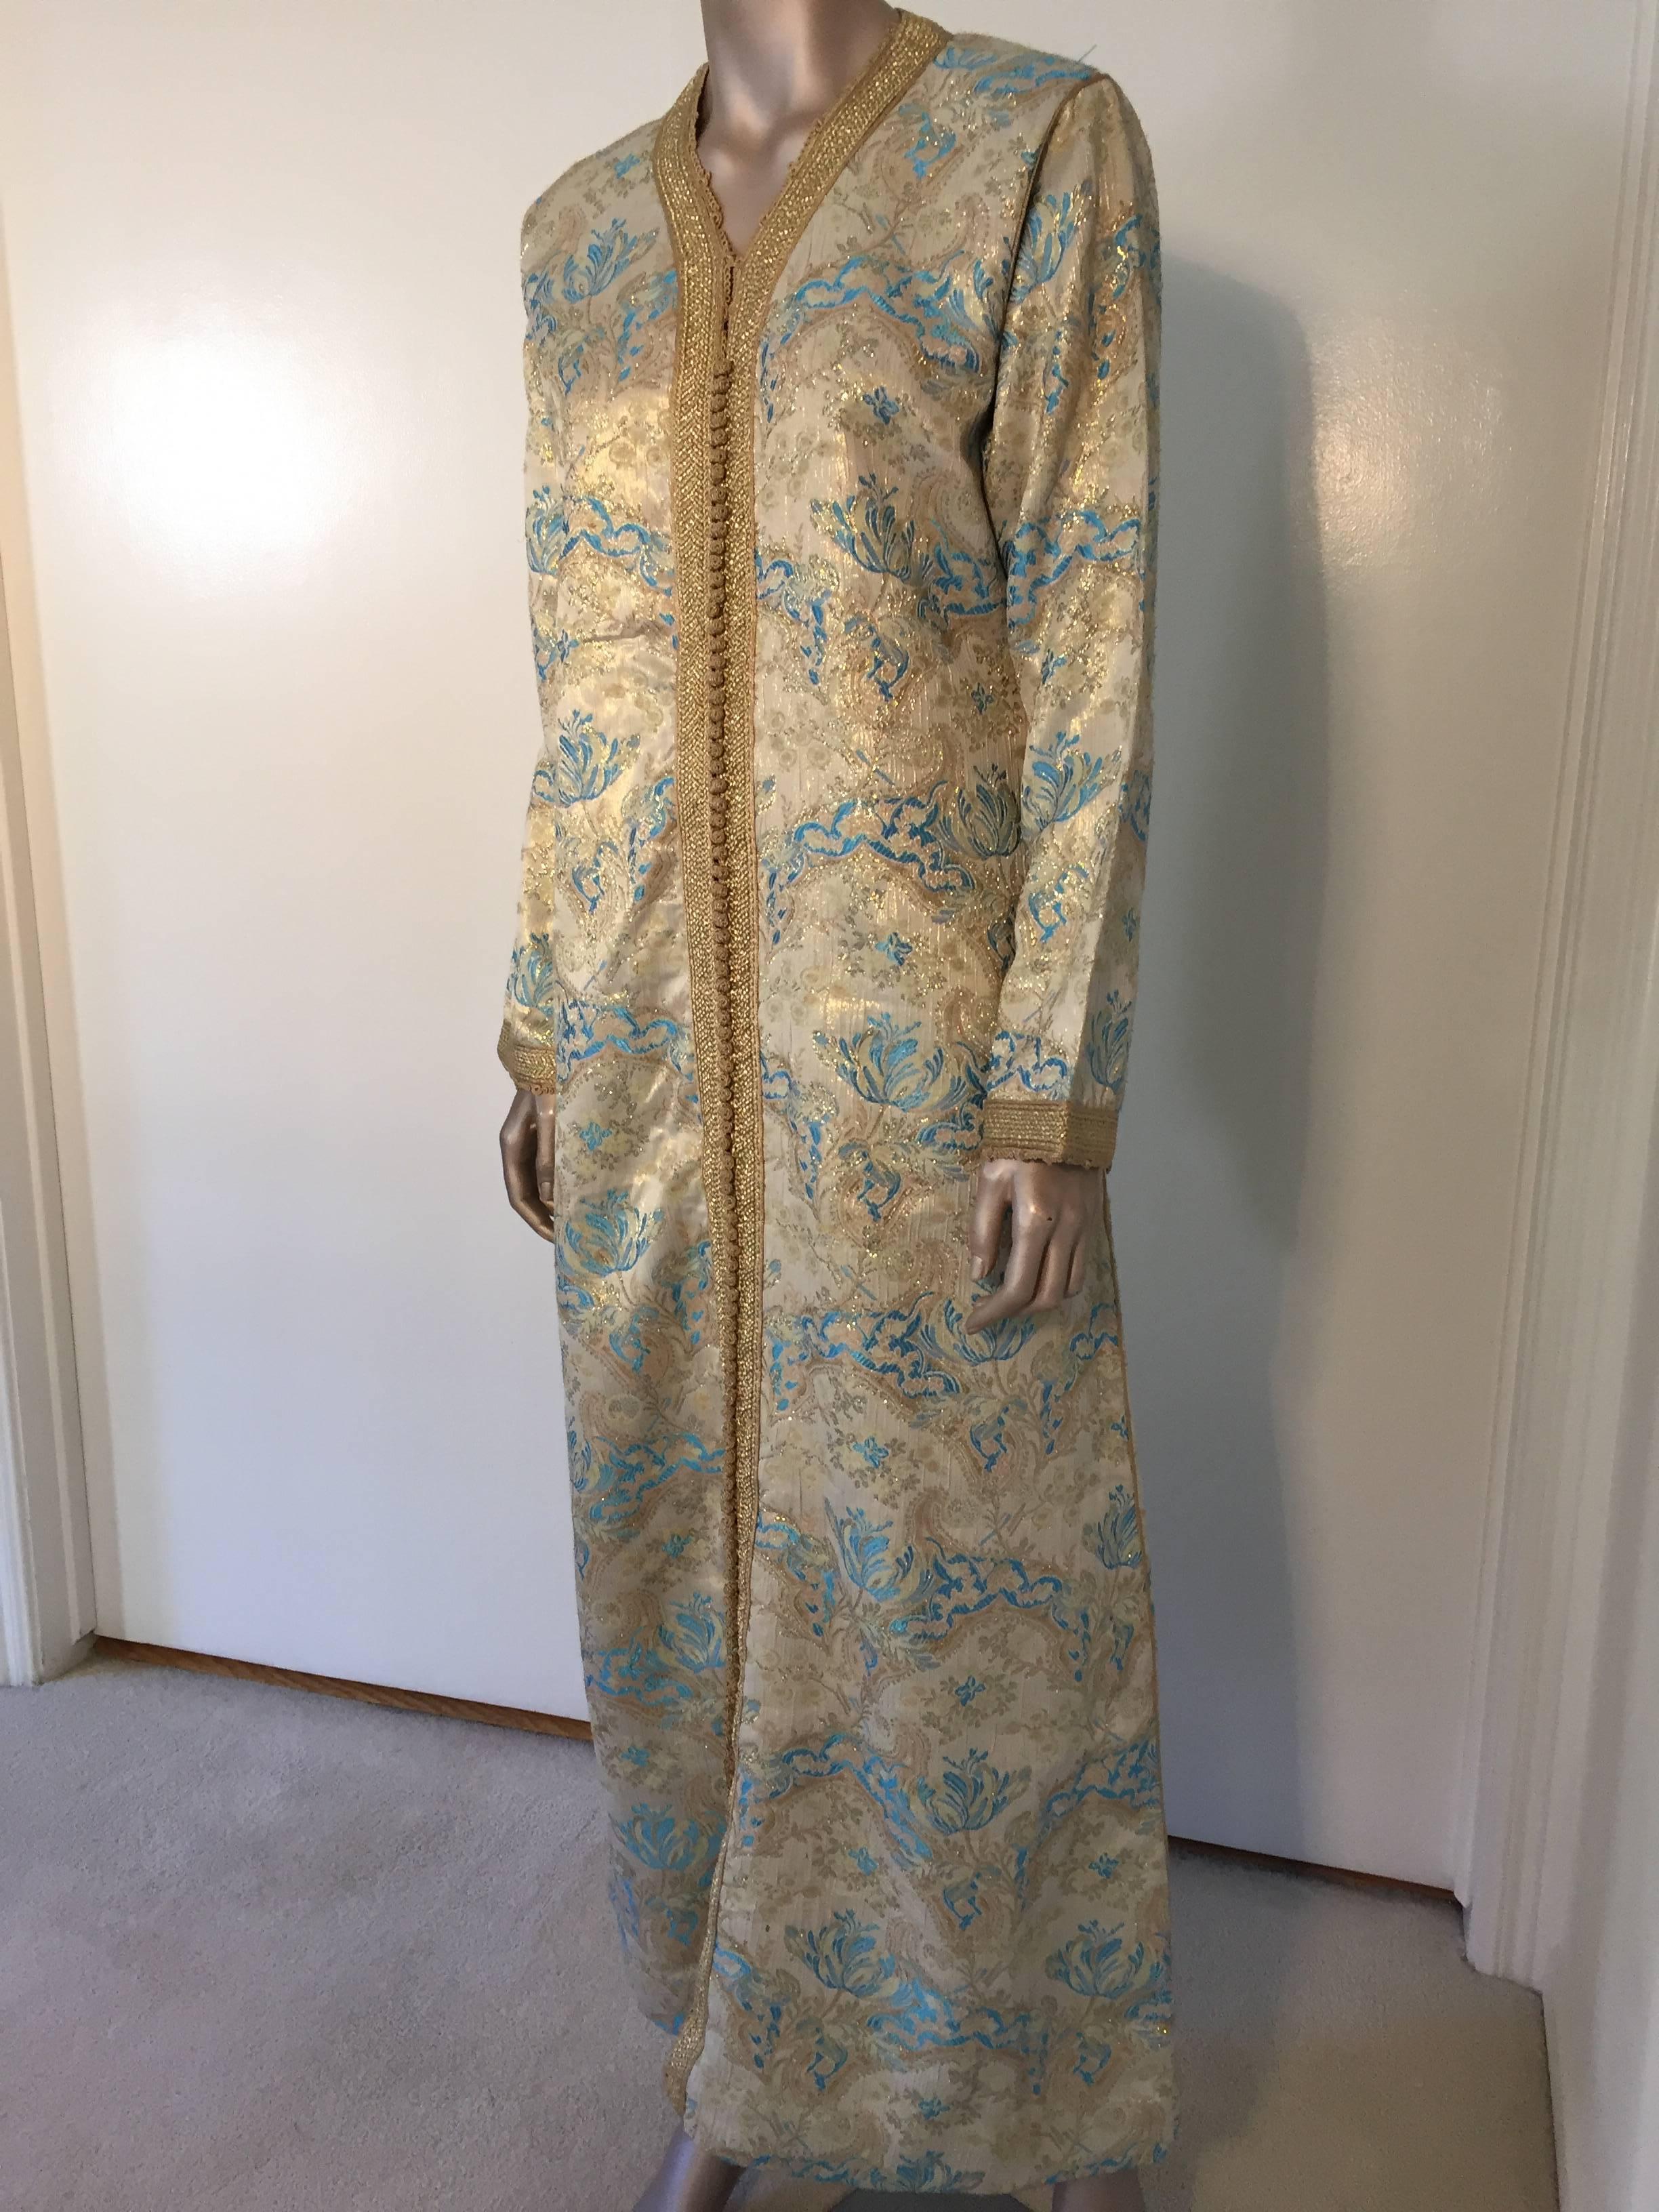 Elegant Moroccan caftan gold and aquamarine blue metallic gorgeous vintage hostess gown.
 Floral multi-colored brocade Kaftan circa 1970s.
Exotic oriental floral long maxi caftan dress with long sleeves in shimmering brocade gold and aquamarine blue